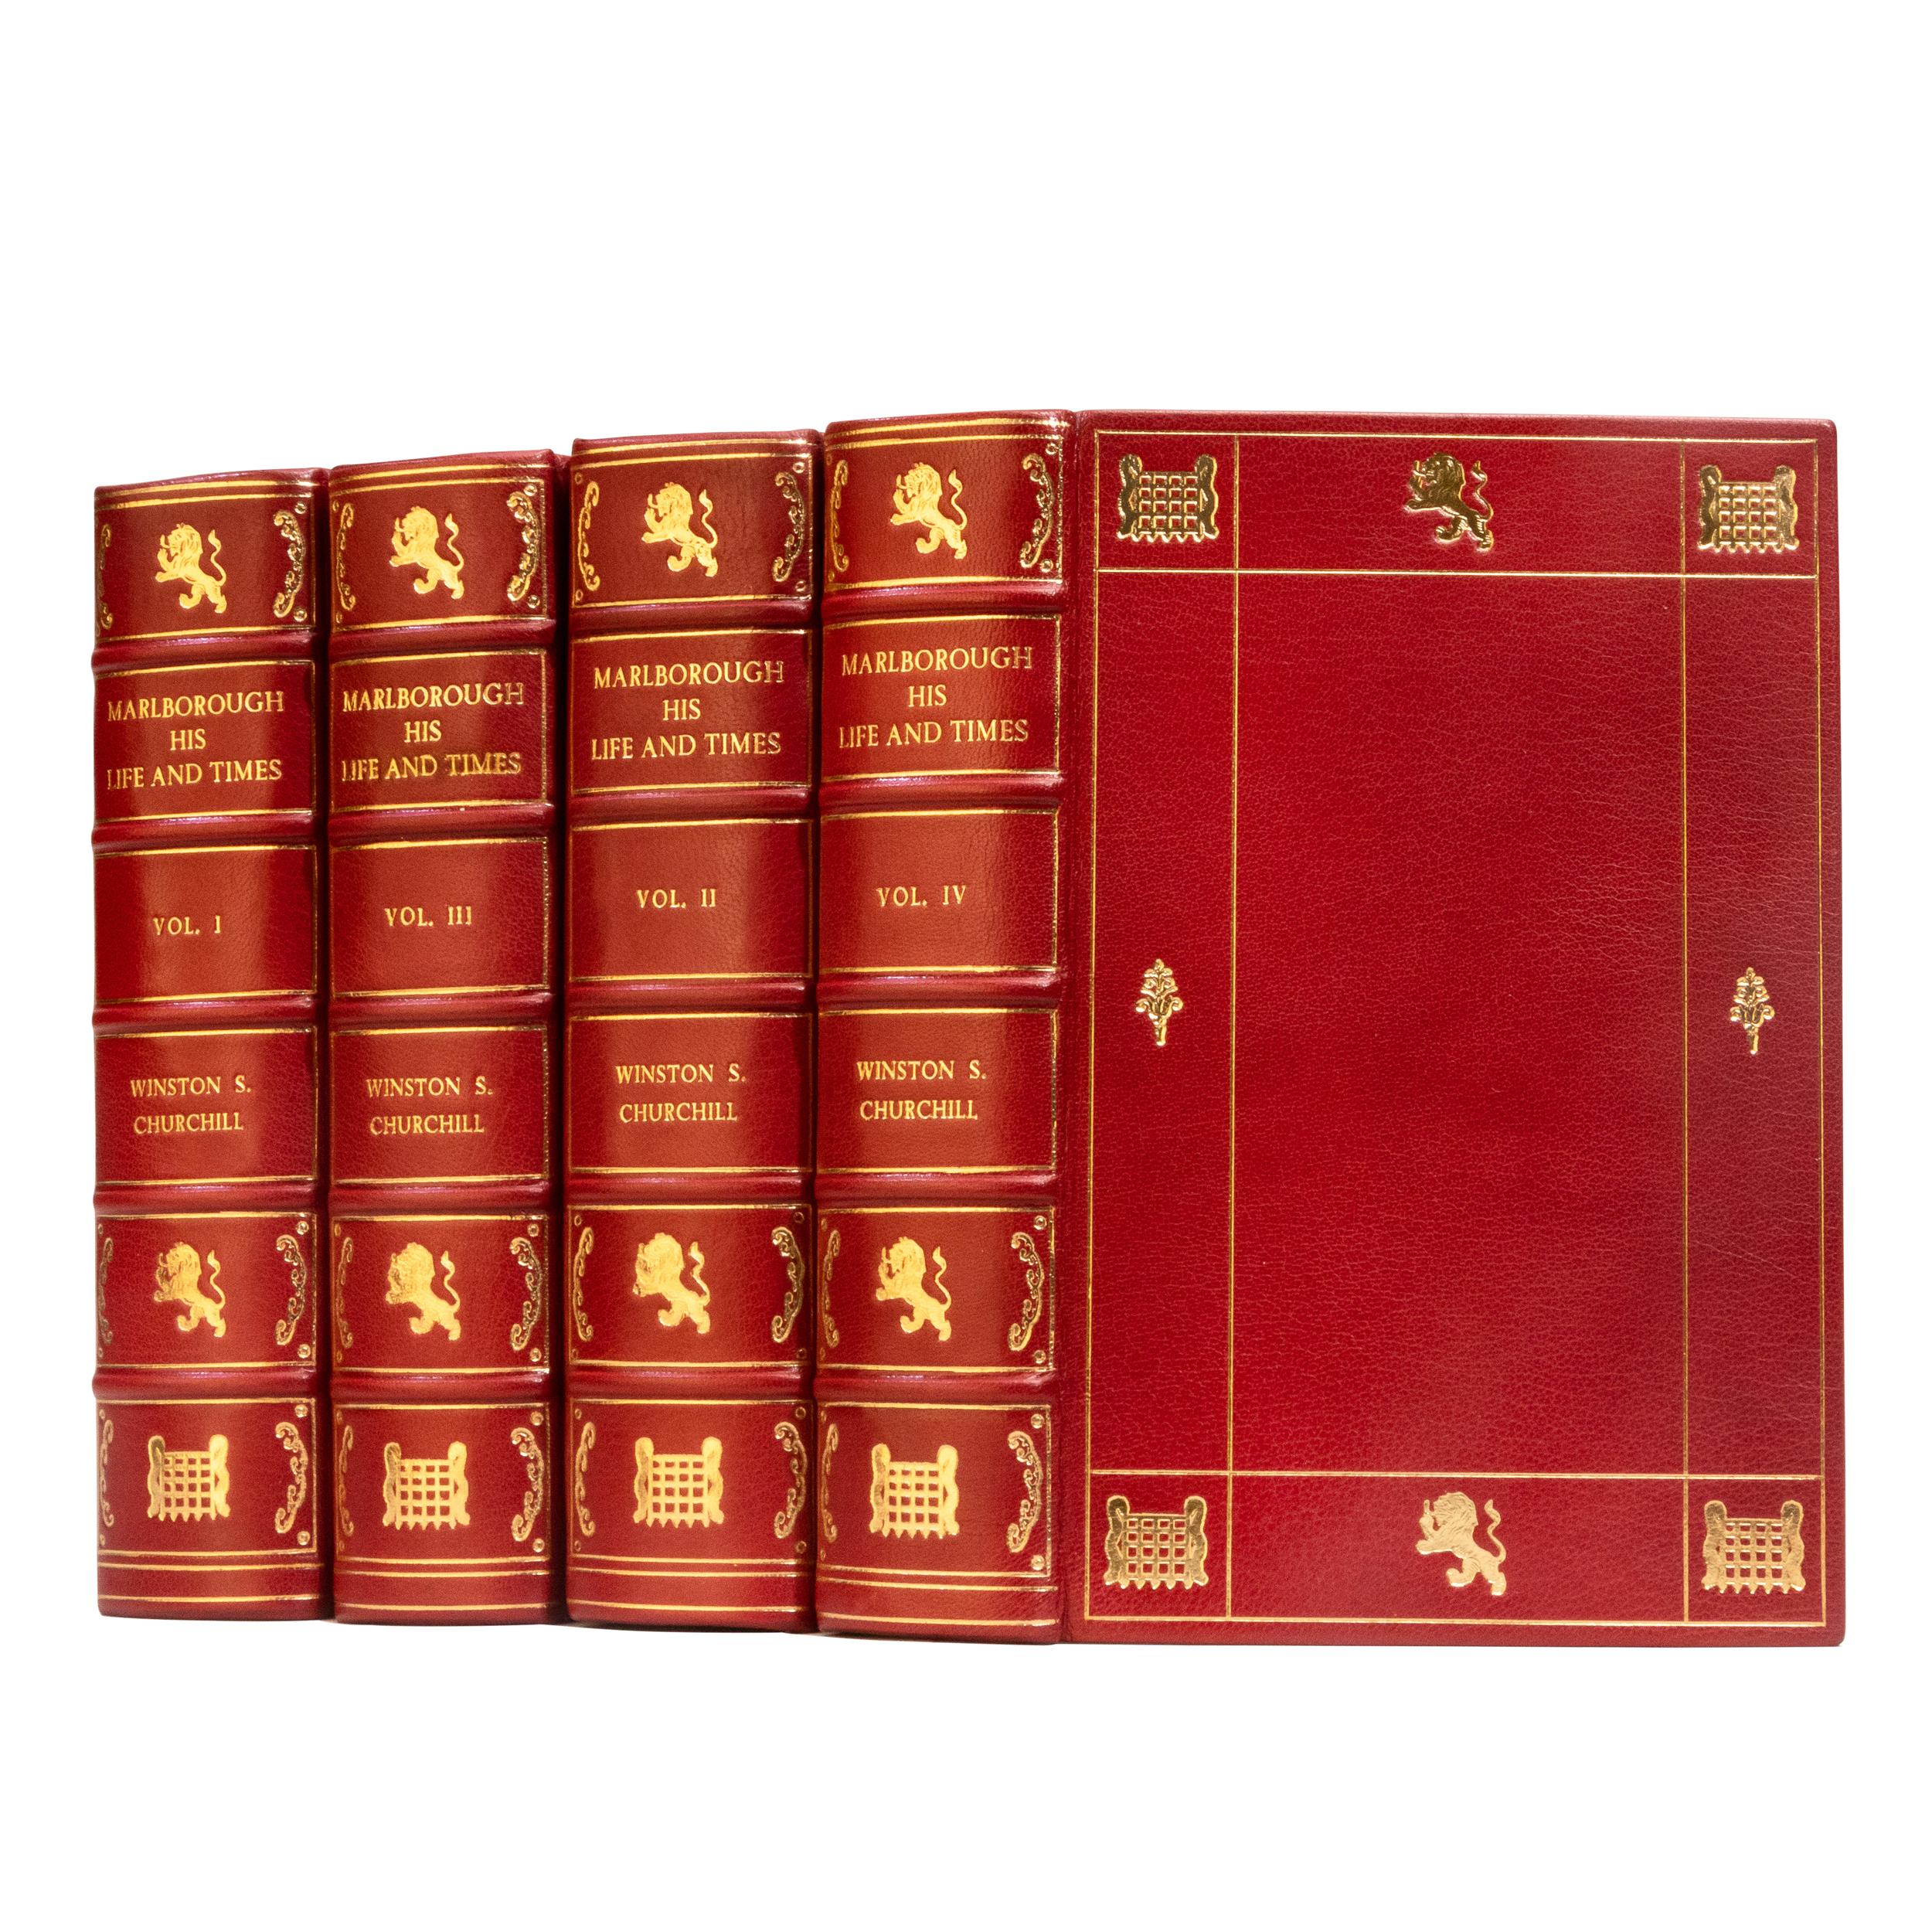 4 Volumes. Sir Winston S. Churchill. Marlborough. His Life And Times.
Rebound in full red morocco, all edges gilt, raised bands, ornate gilt on covers and spines, marbled endpapers, illustrated. Published: George G. Harrap & Co.
1933-38 First